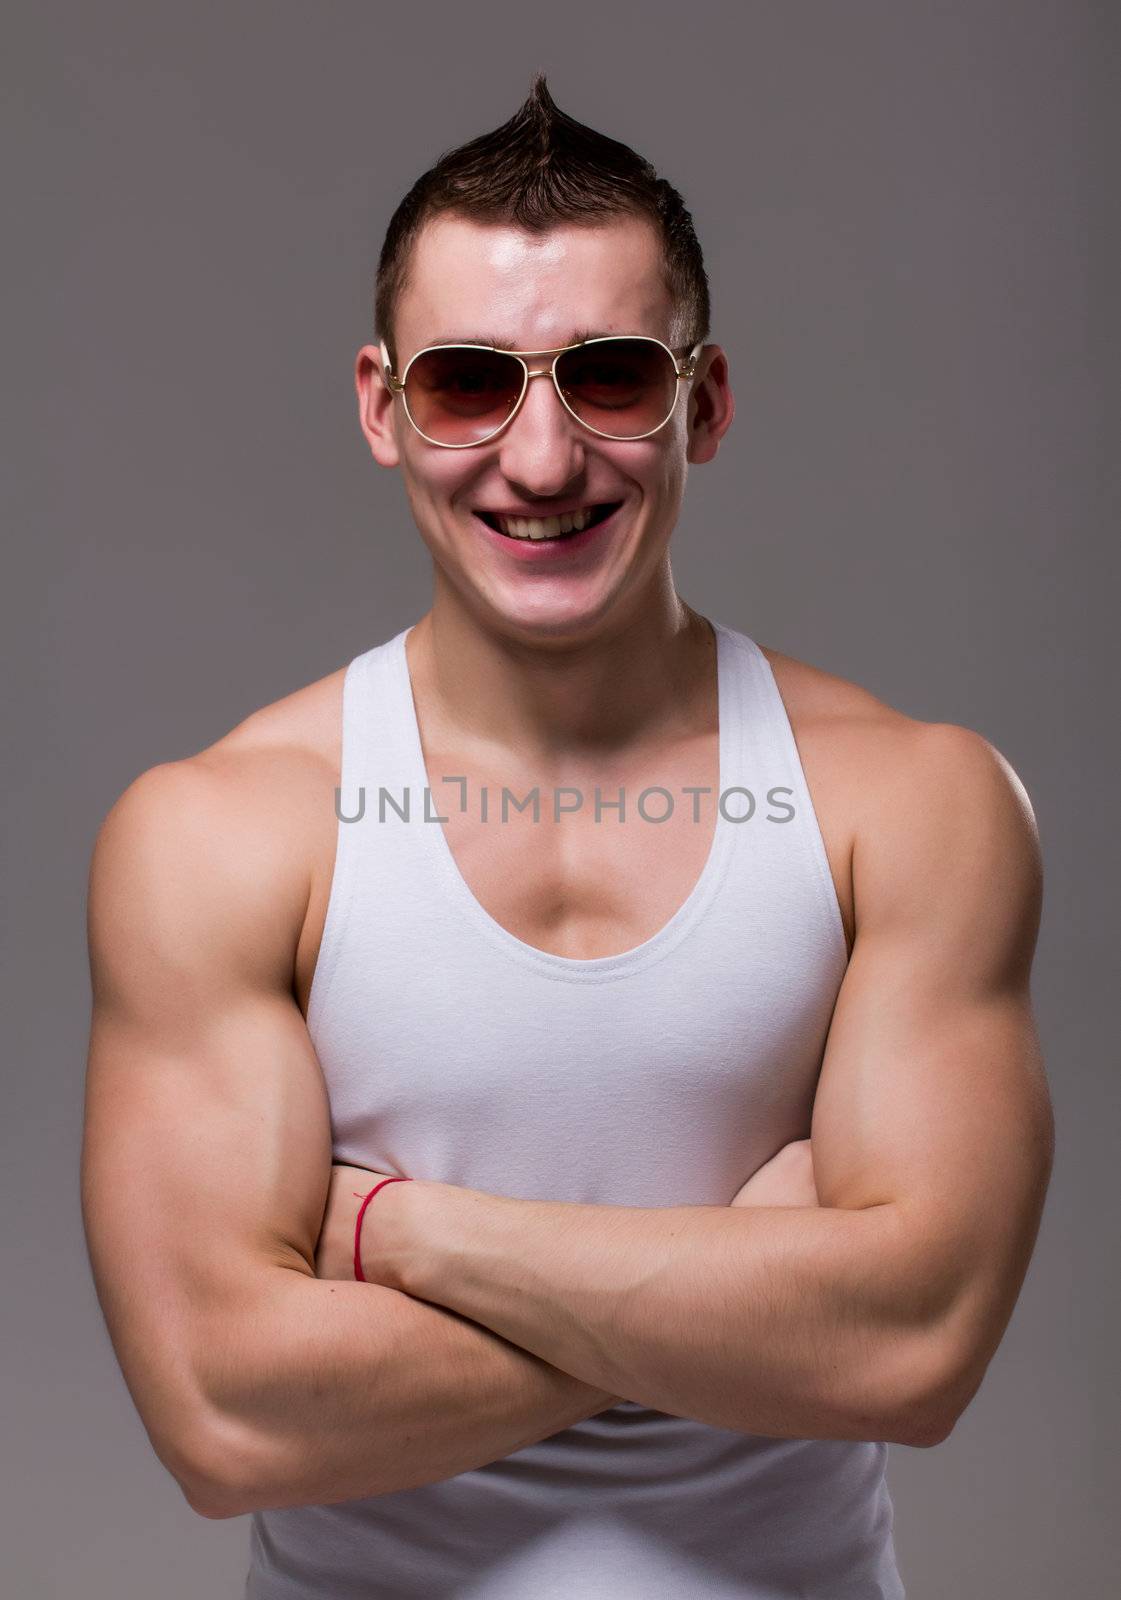 Muscular man wearing black sunglasses posing on a gray background